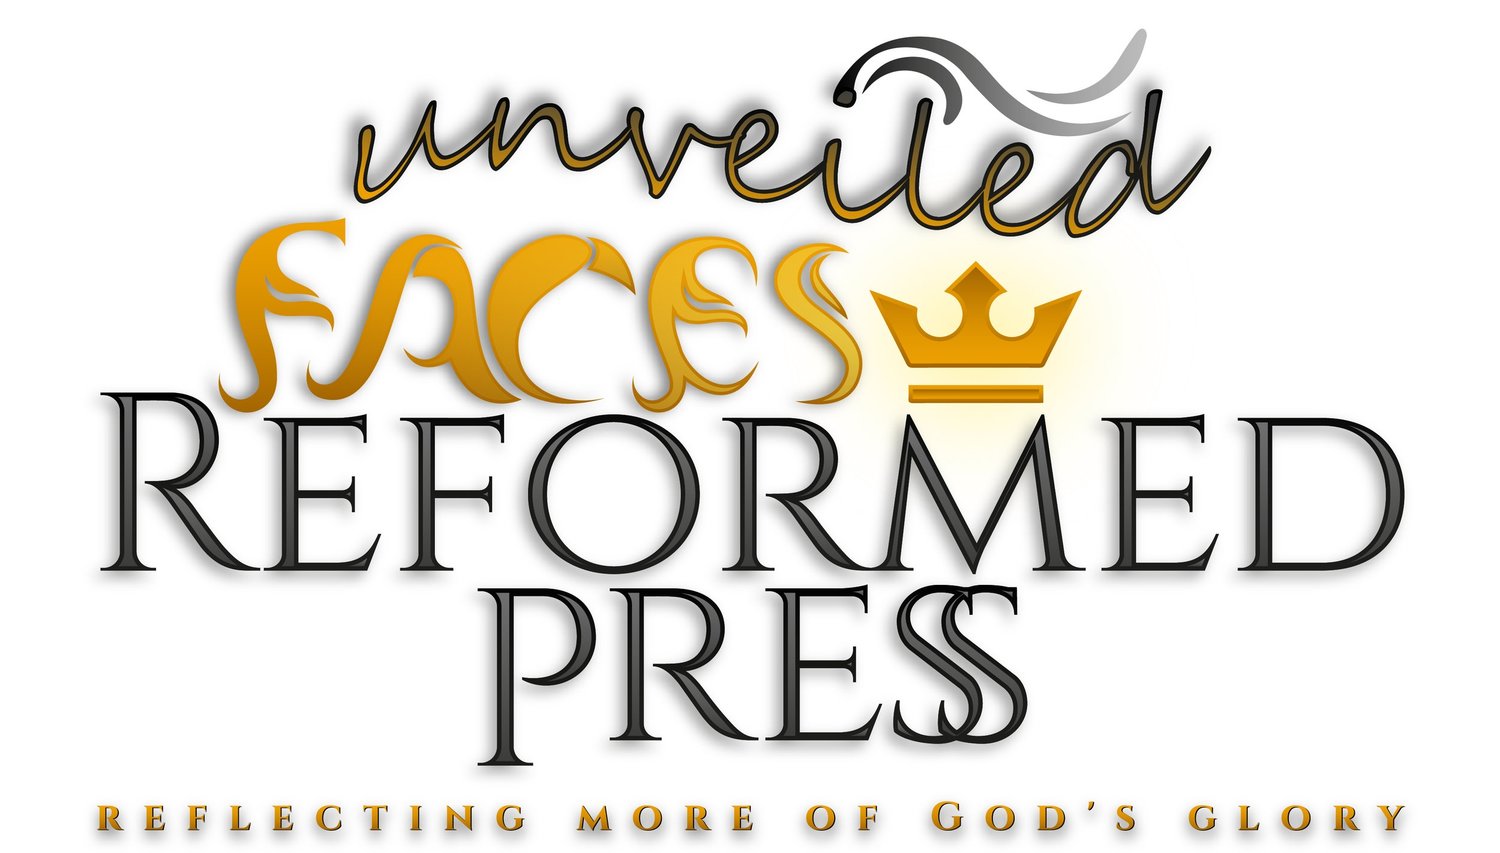 Unveiled Faces Reformed Press